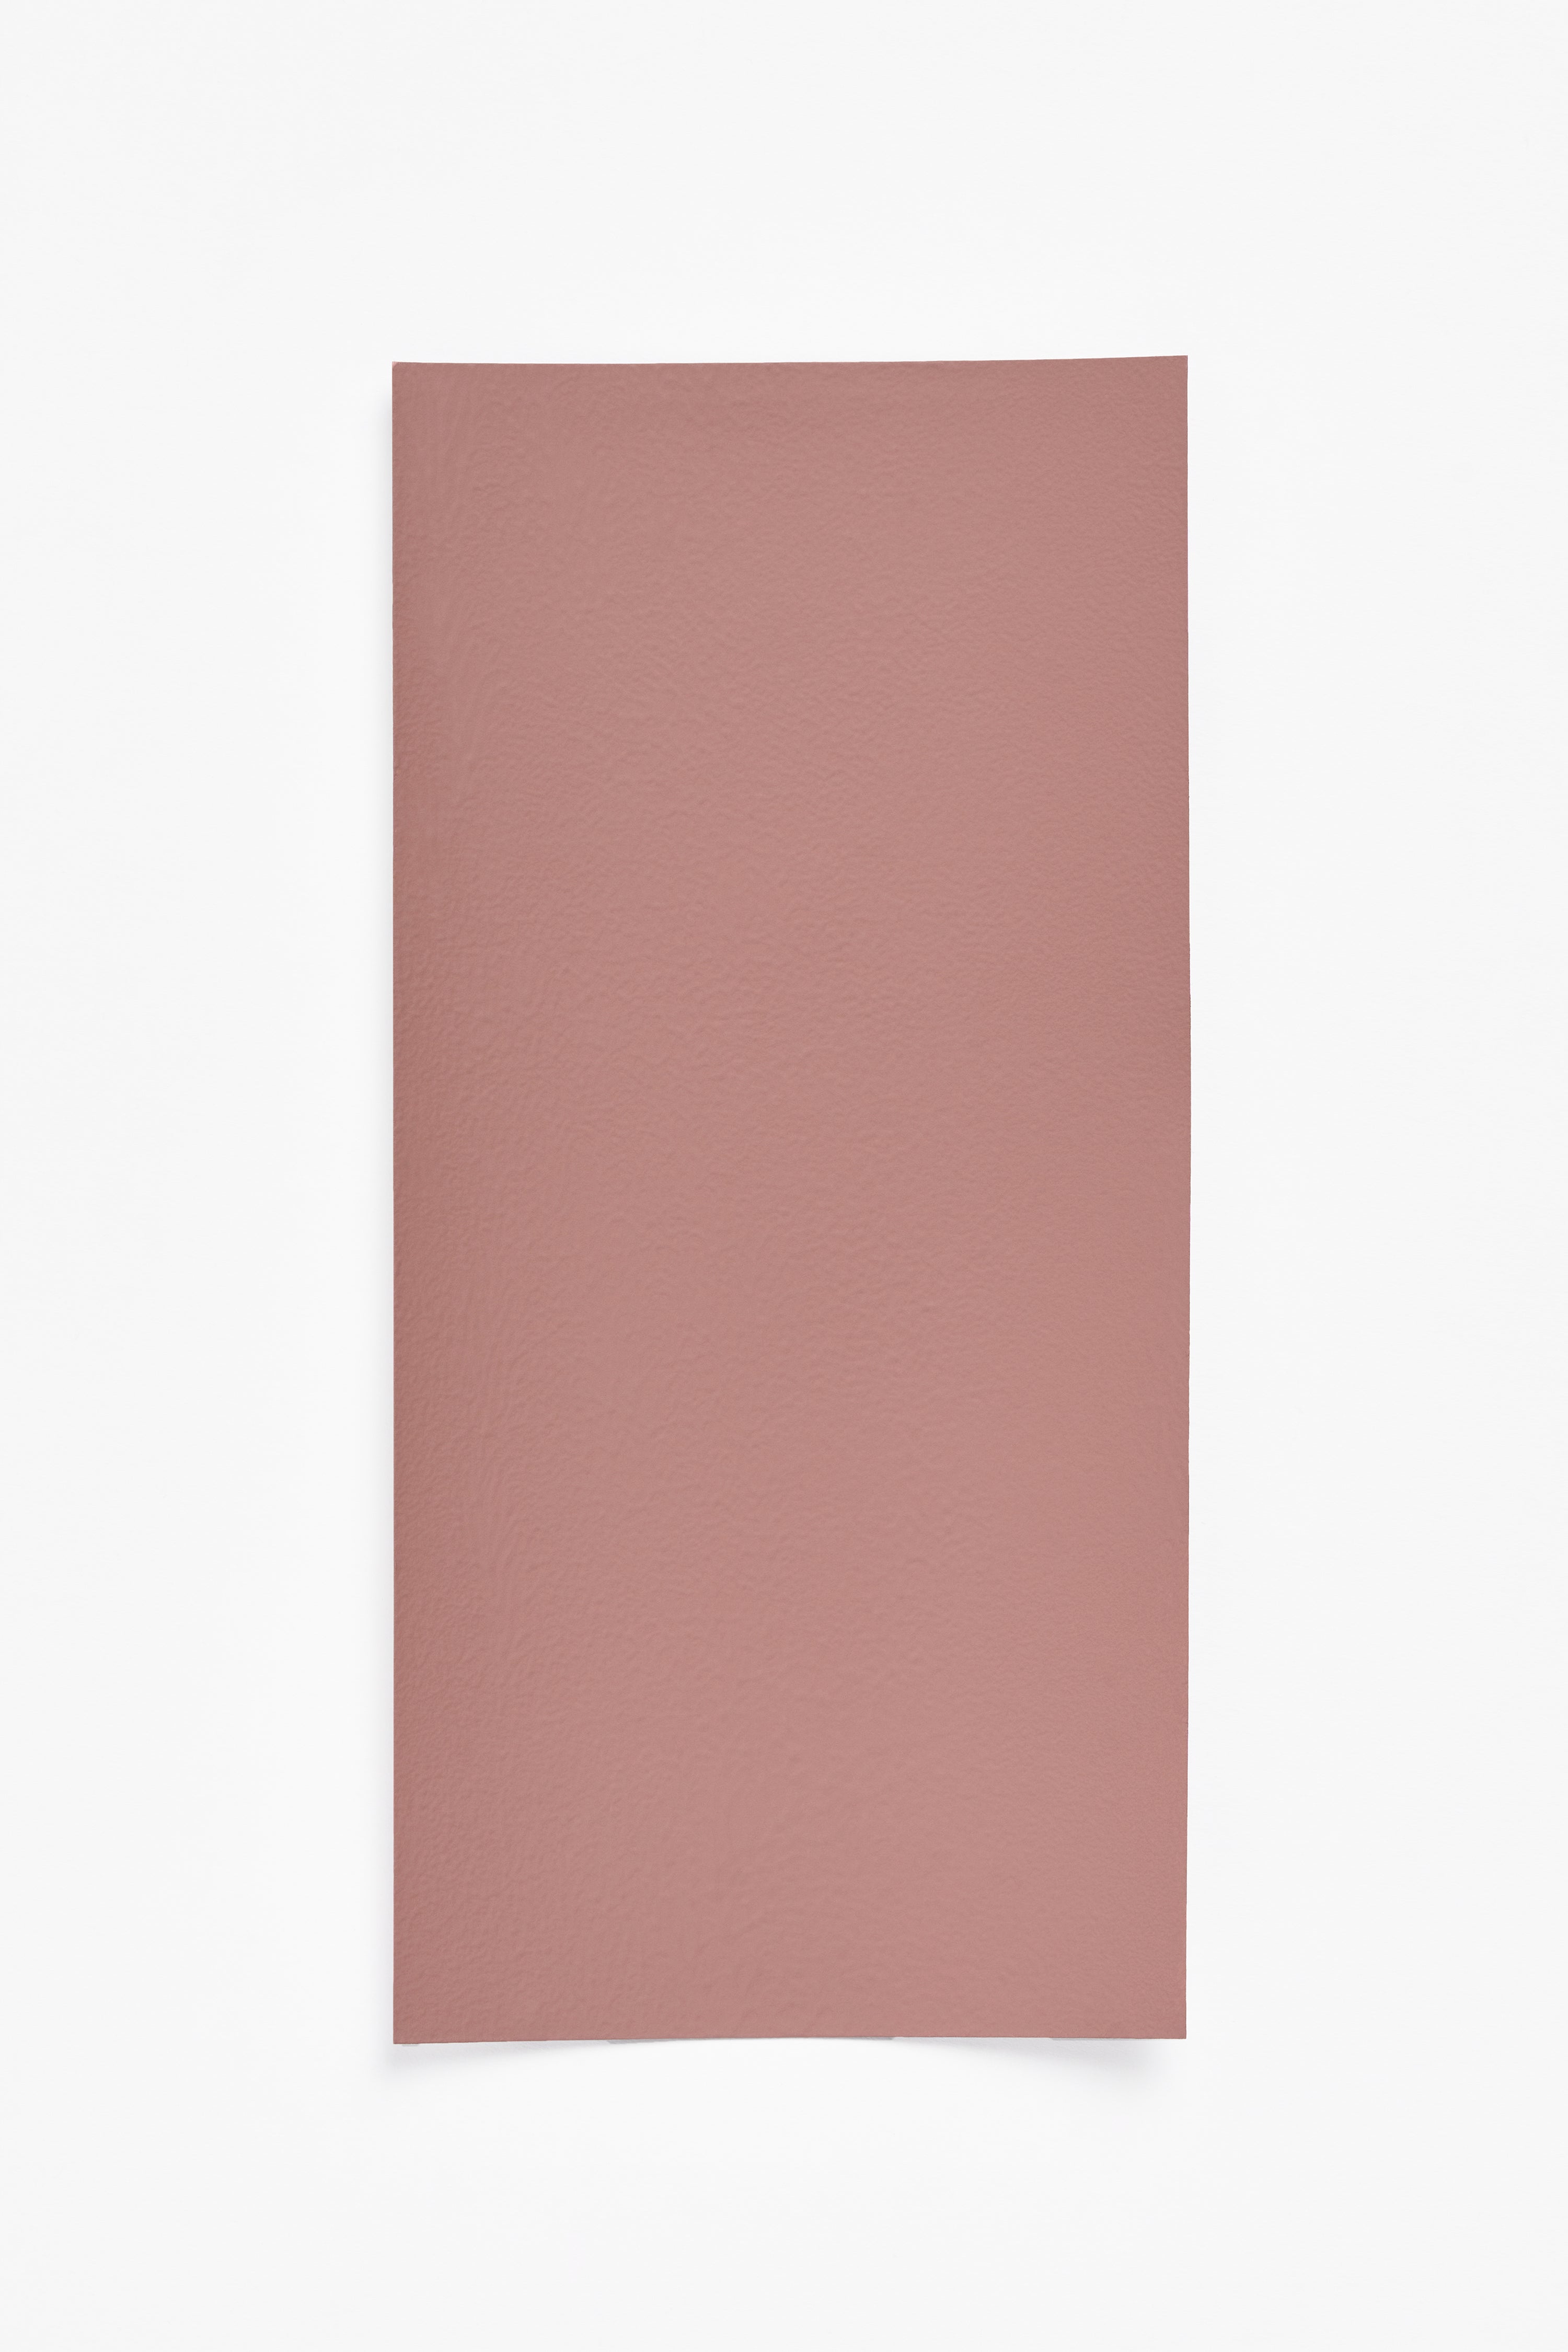 Madder — a paint colour developed by Barber Osgerby for Blēo